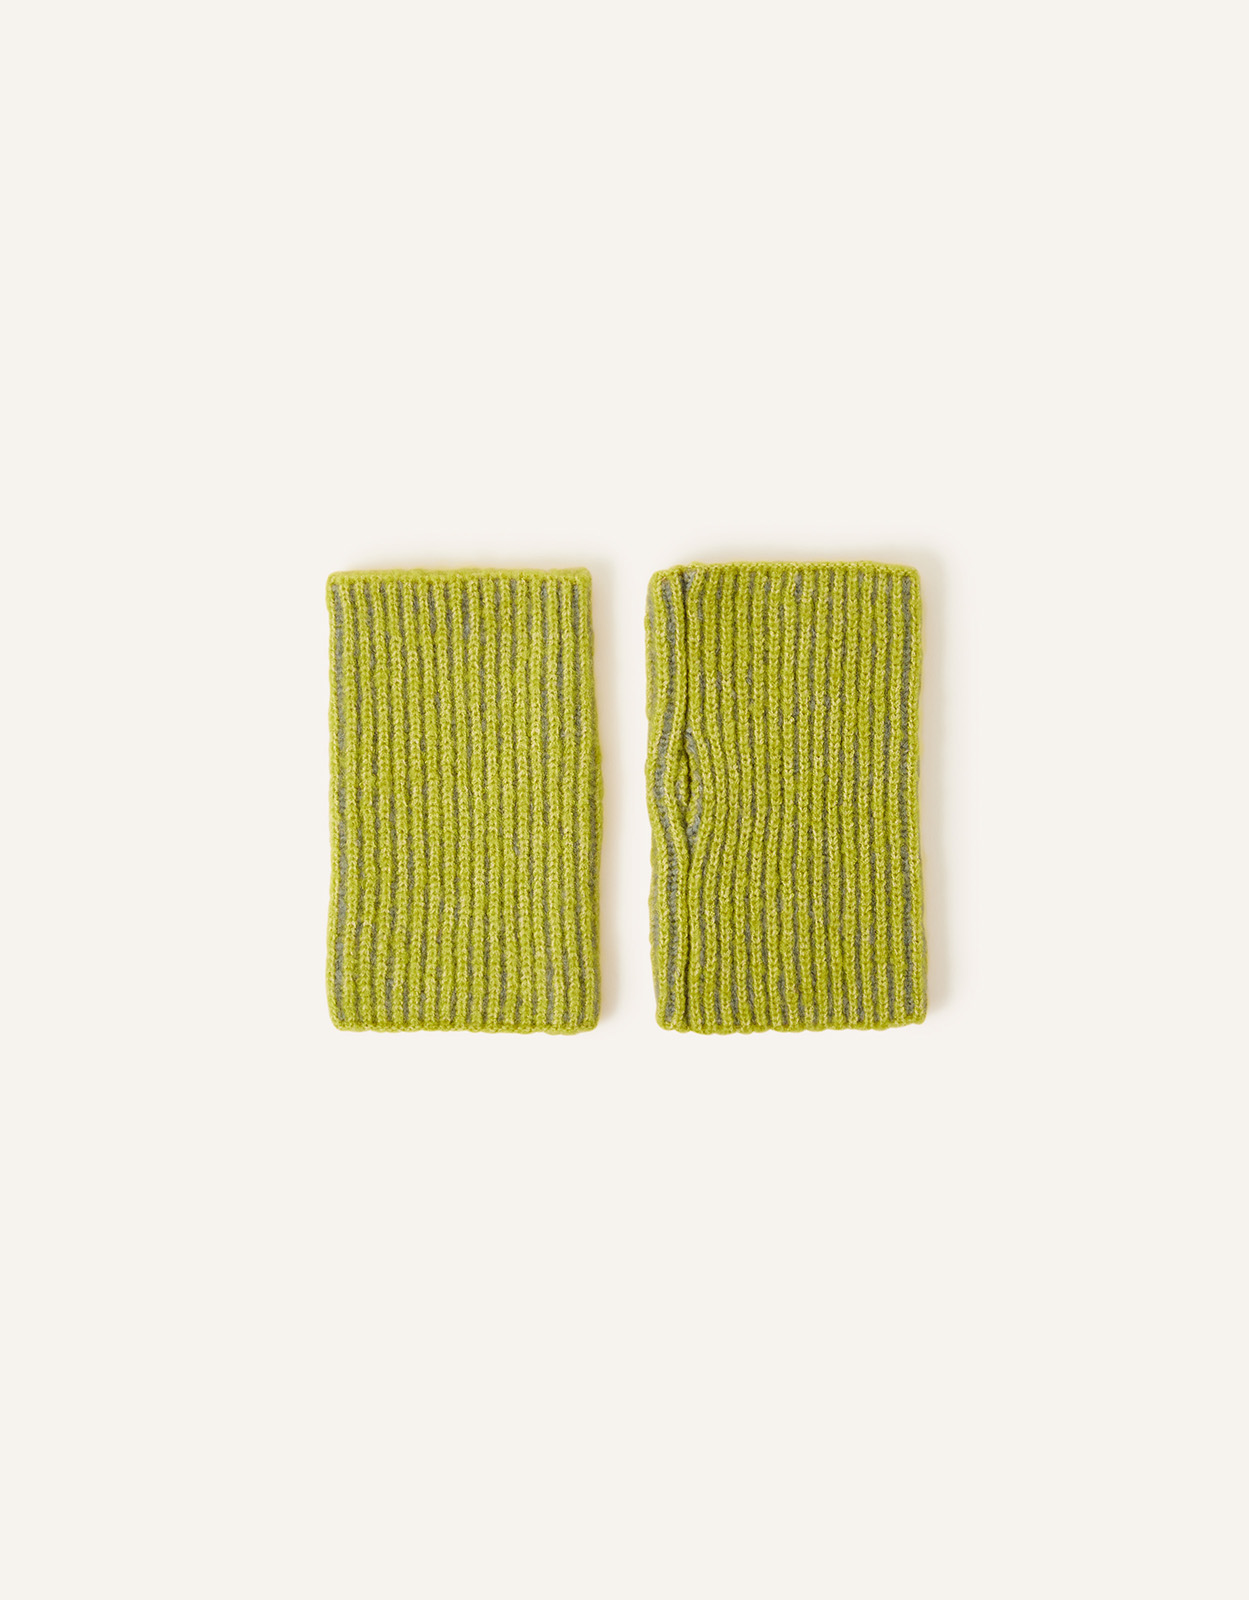 Accessorize Ribbed Cut Off Gloves, Size: 9x15cm